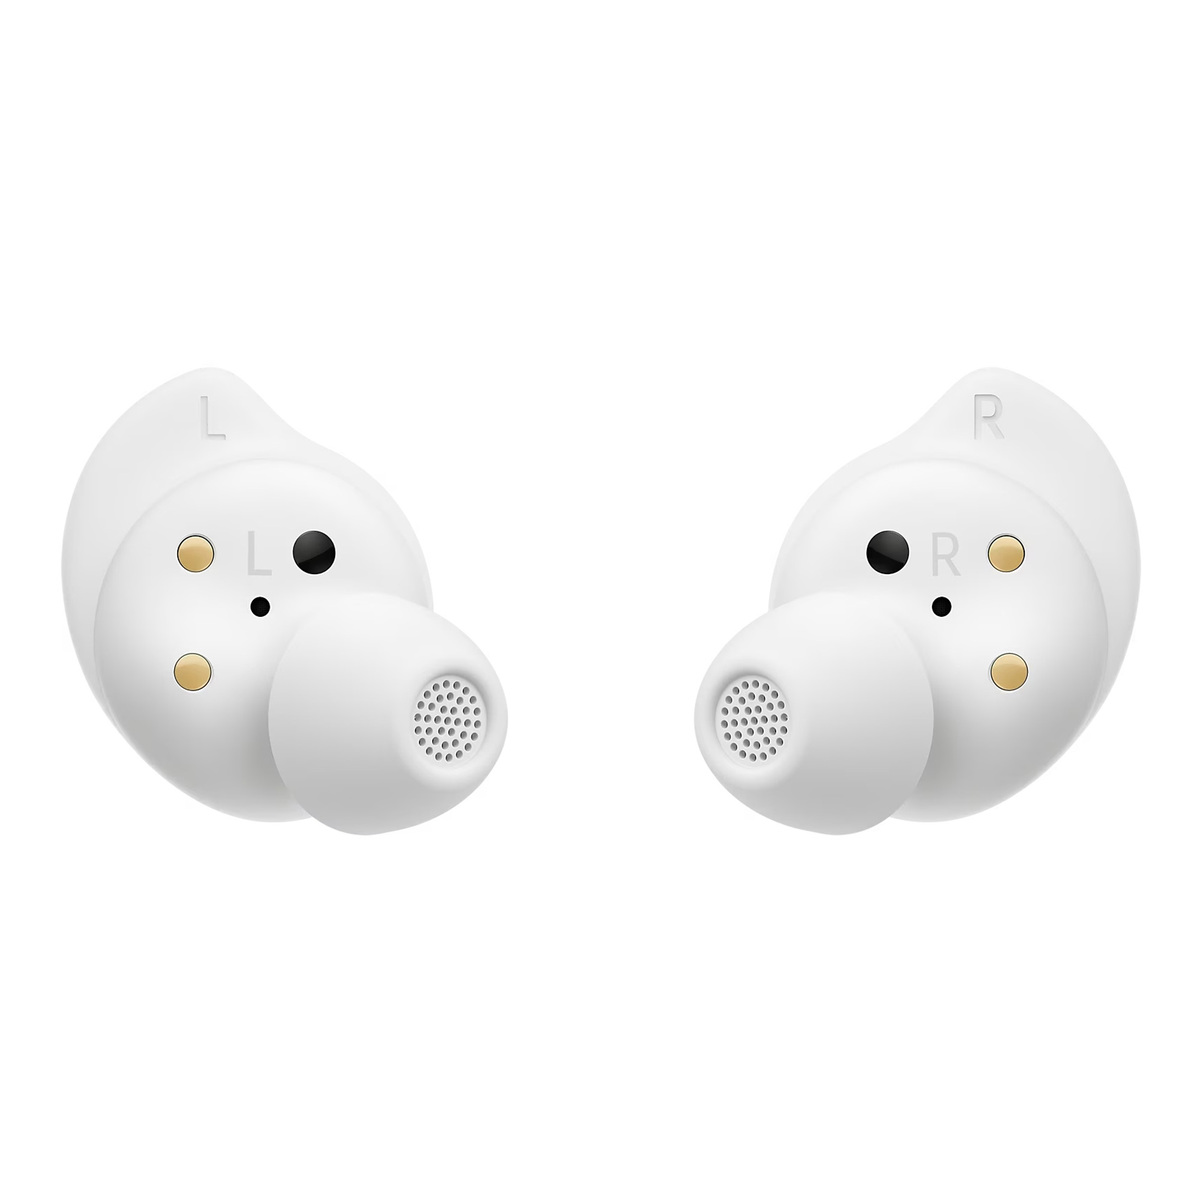 Samsung Galaxy Buds FE with Active Noise Cancellation, White, R400NZW